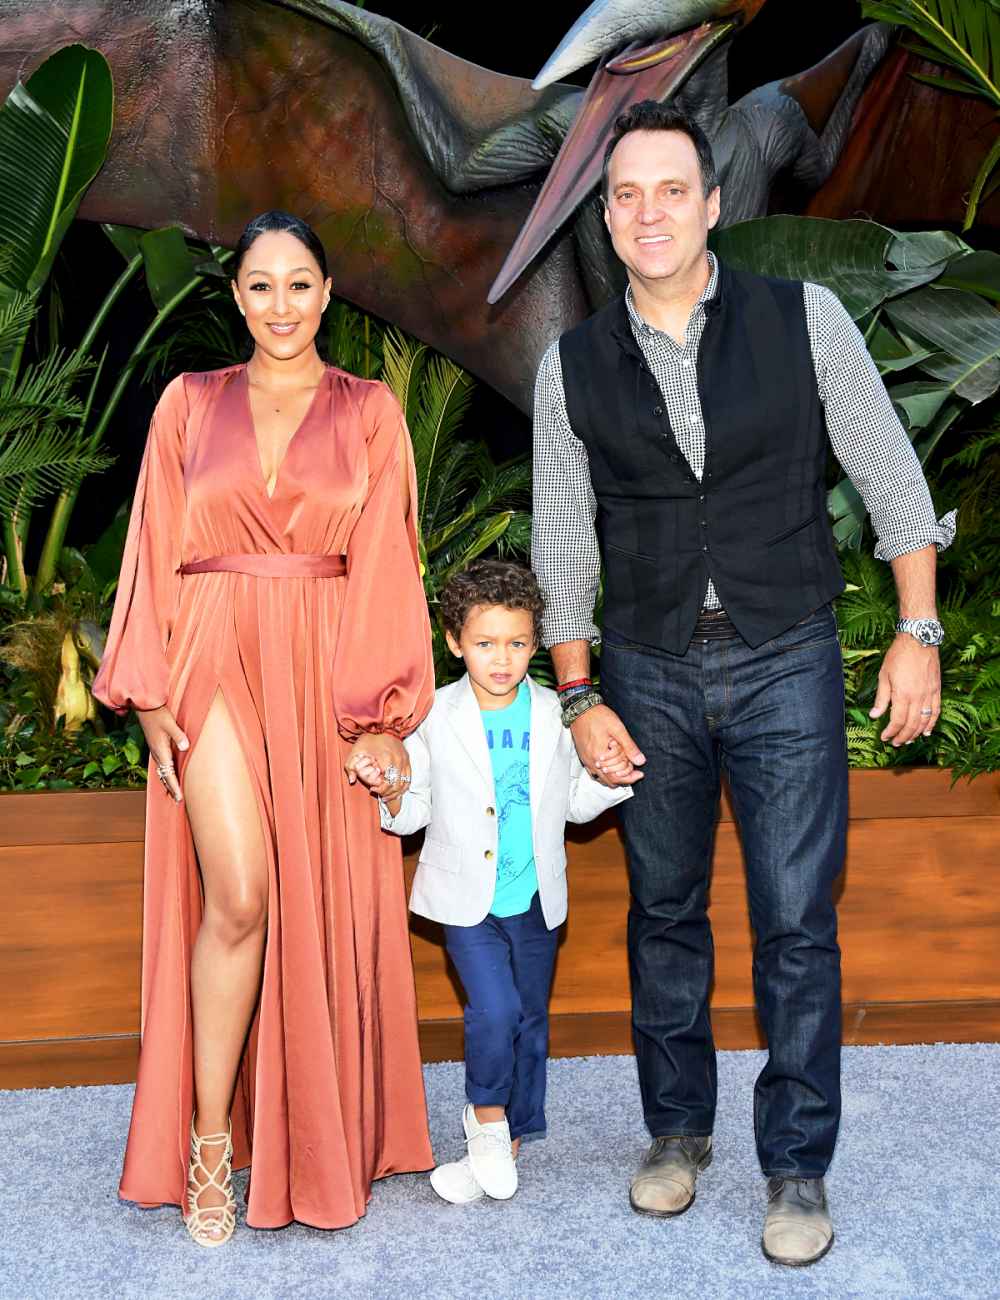 Tamera Mowry and Adam Housley with son Aden attend the premiere of 'Jurassic World: Fallen Kingdom' at Walt Disney Concert Hall on June 12, 2018 in Los Angeles, California.